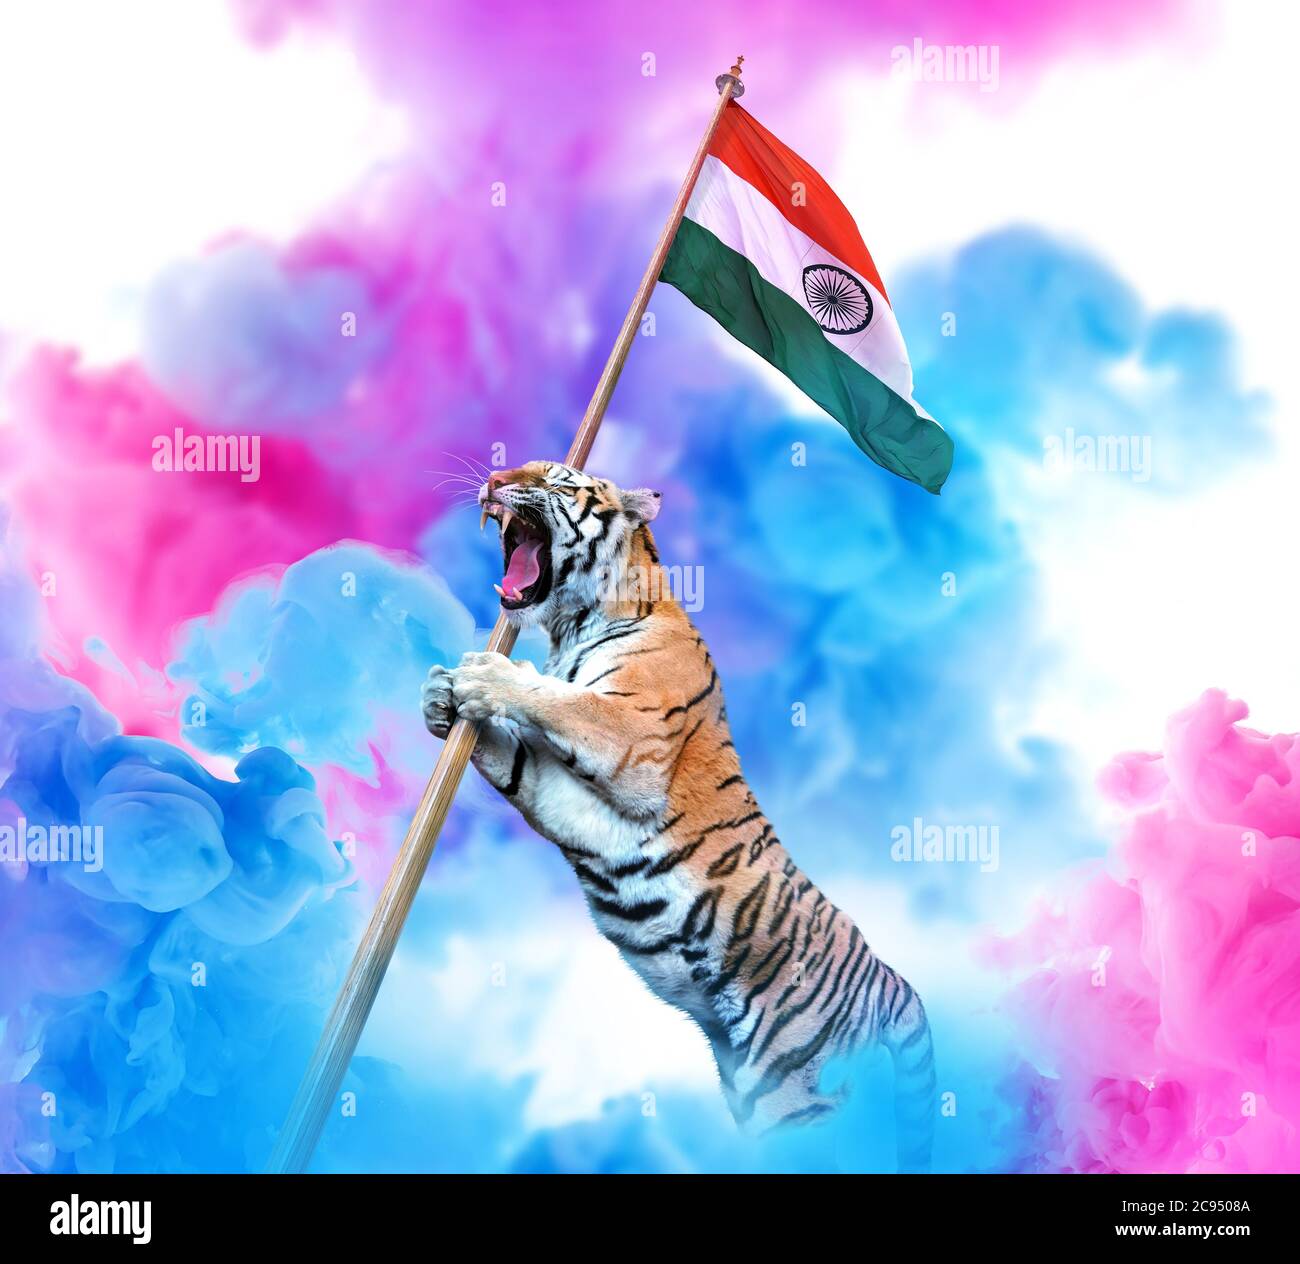 Tiger carrying an Indian flag with colourful smoke background. Patriotic theme concept. Stock Photo